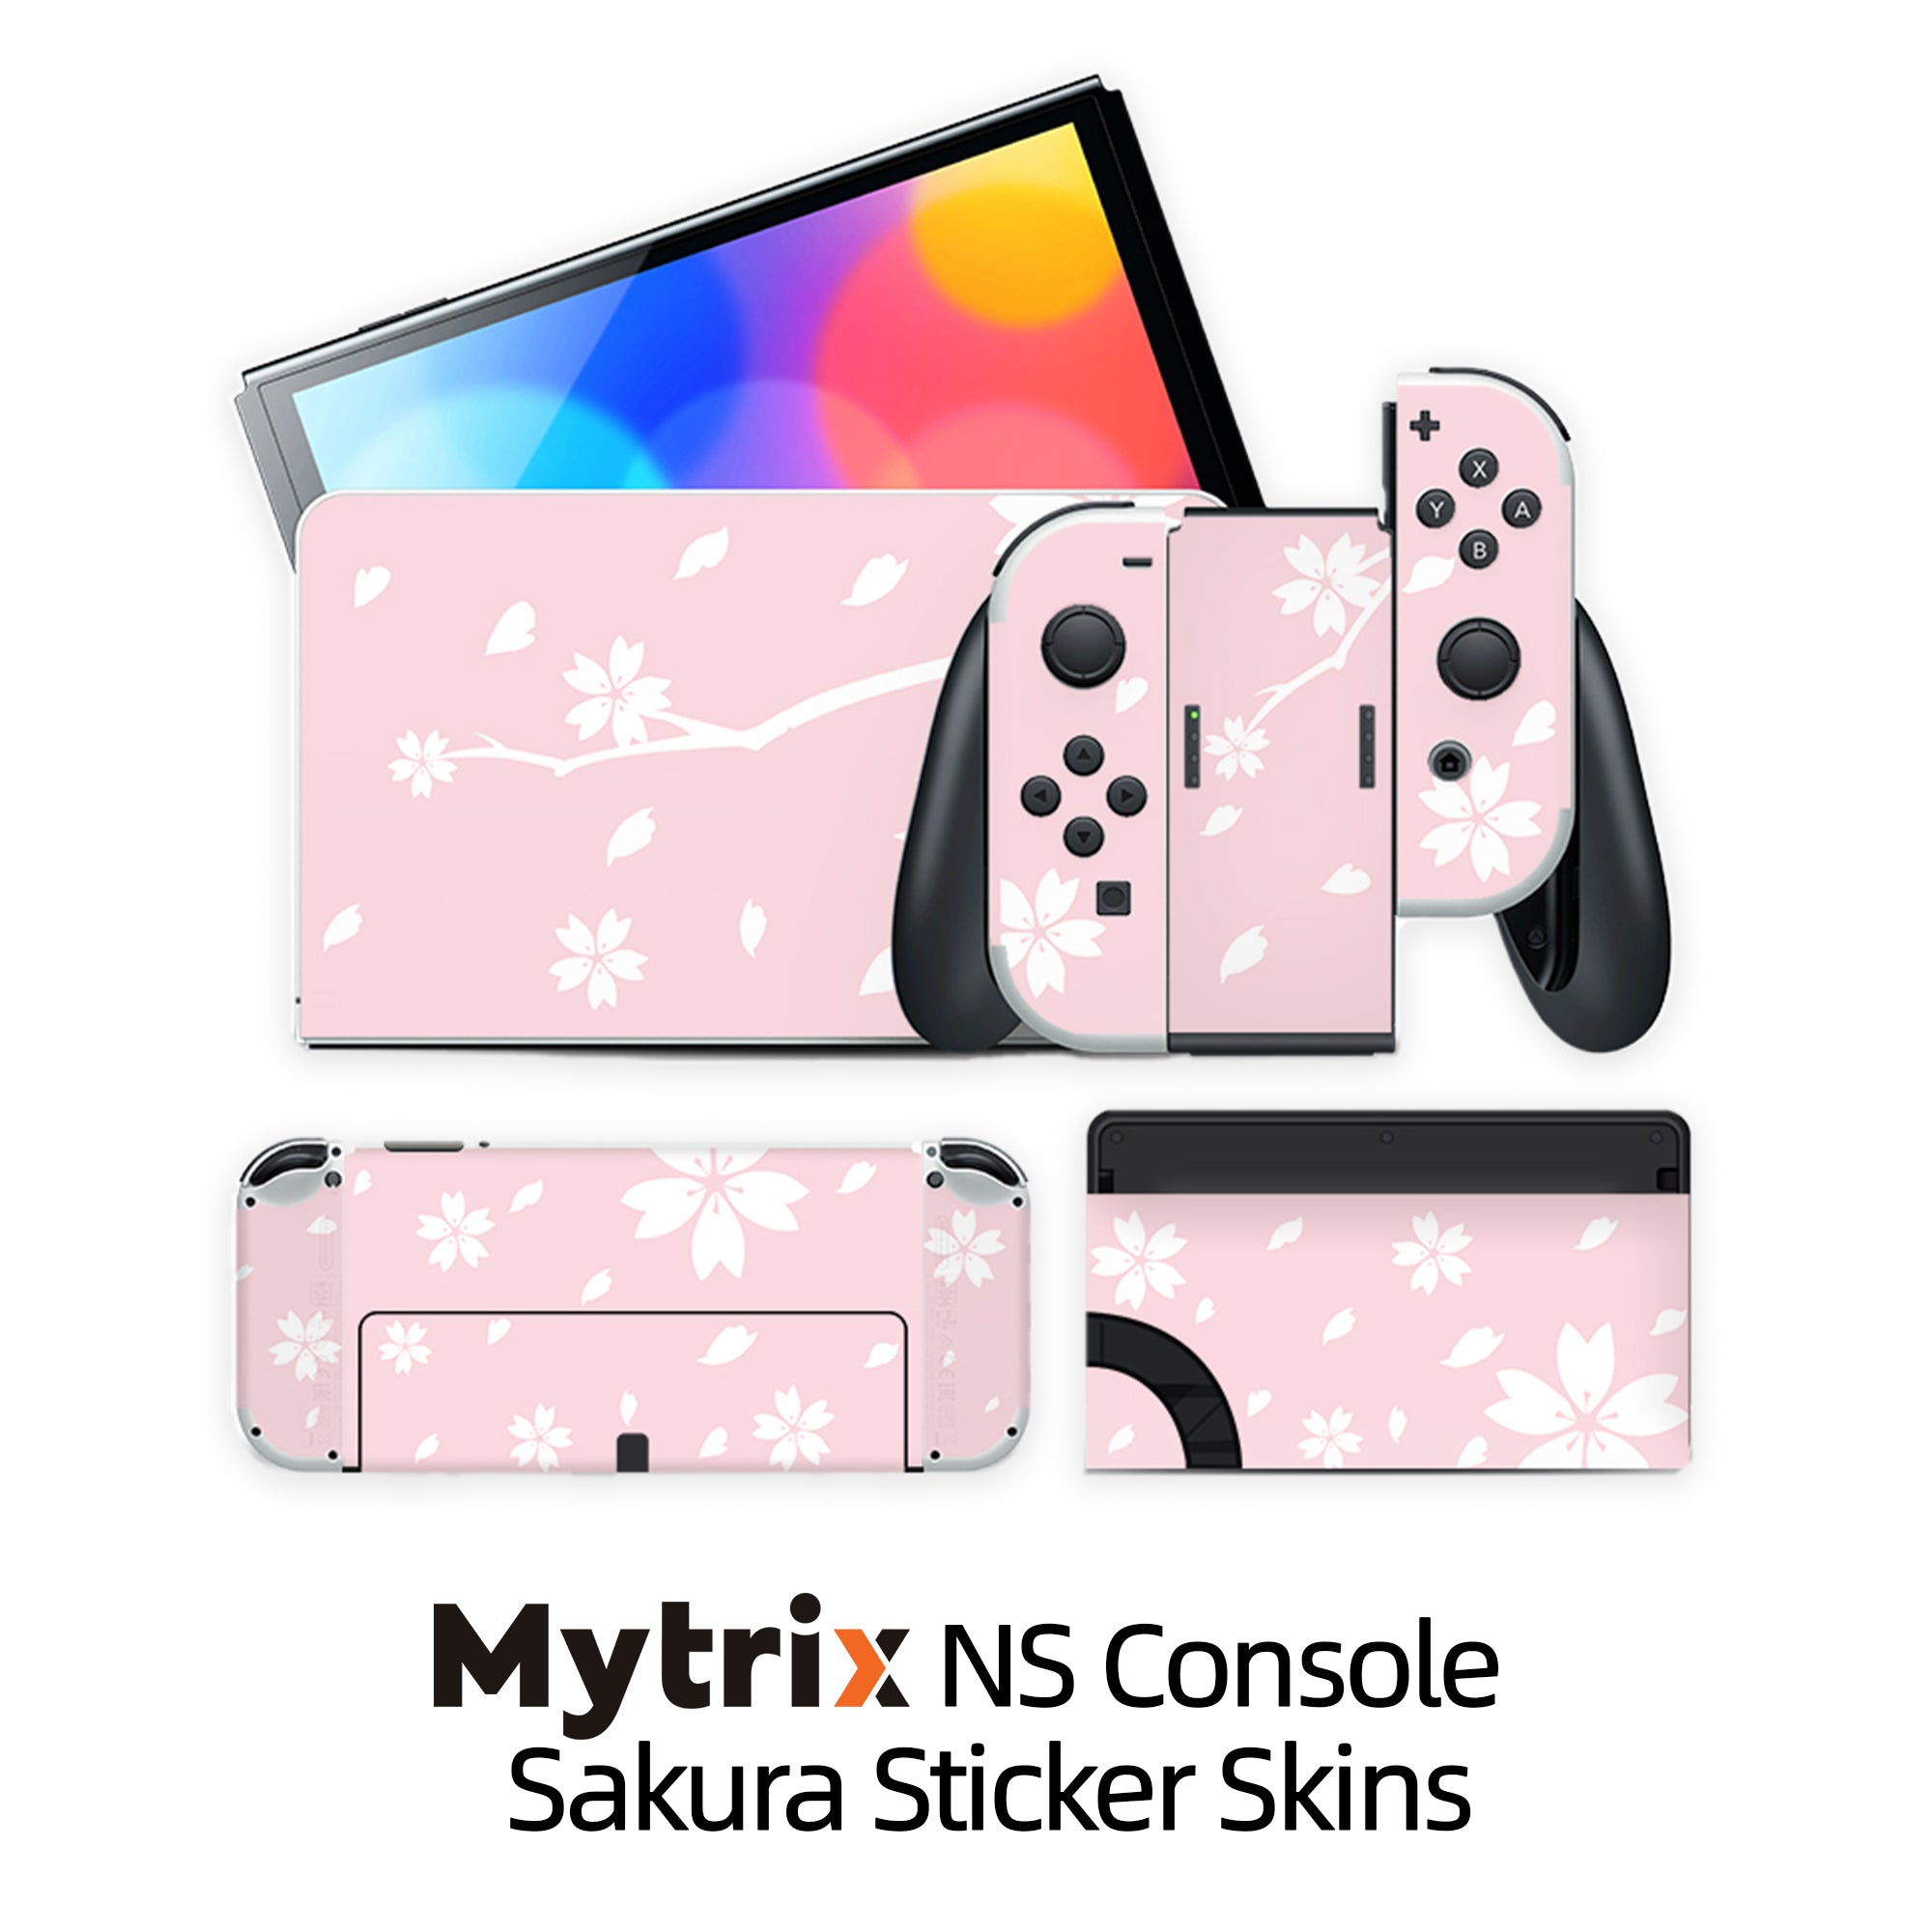 2022 New Nintendo Switch OLED Model Neon Red Blue with Legend of Zelda Link's Awakening and Mytrix Full Body Skin Sticker for NS OLED Console, Dock and Joycons - Sakura Pink